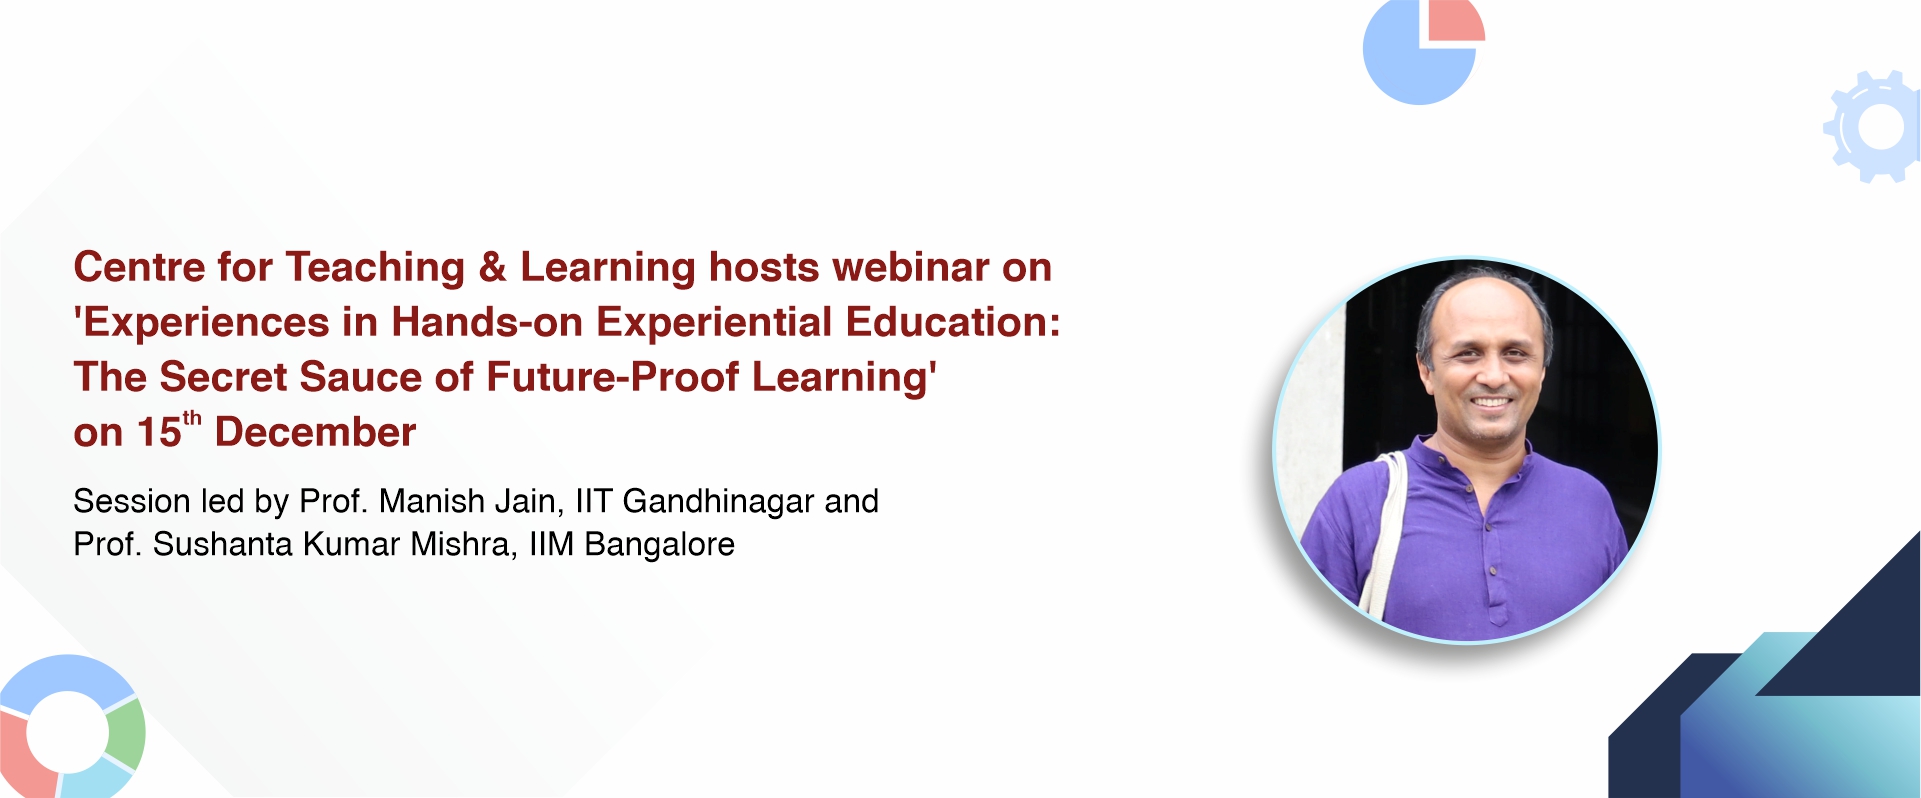 Centre for Teaching & Learning hosts webinar on ‘Experiences in Hands-on Experiential Education: The Secret Sauce of Future-Proof Learning’ on 15th December